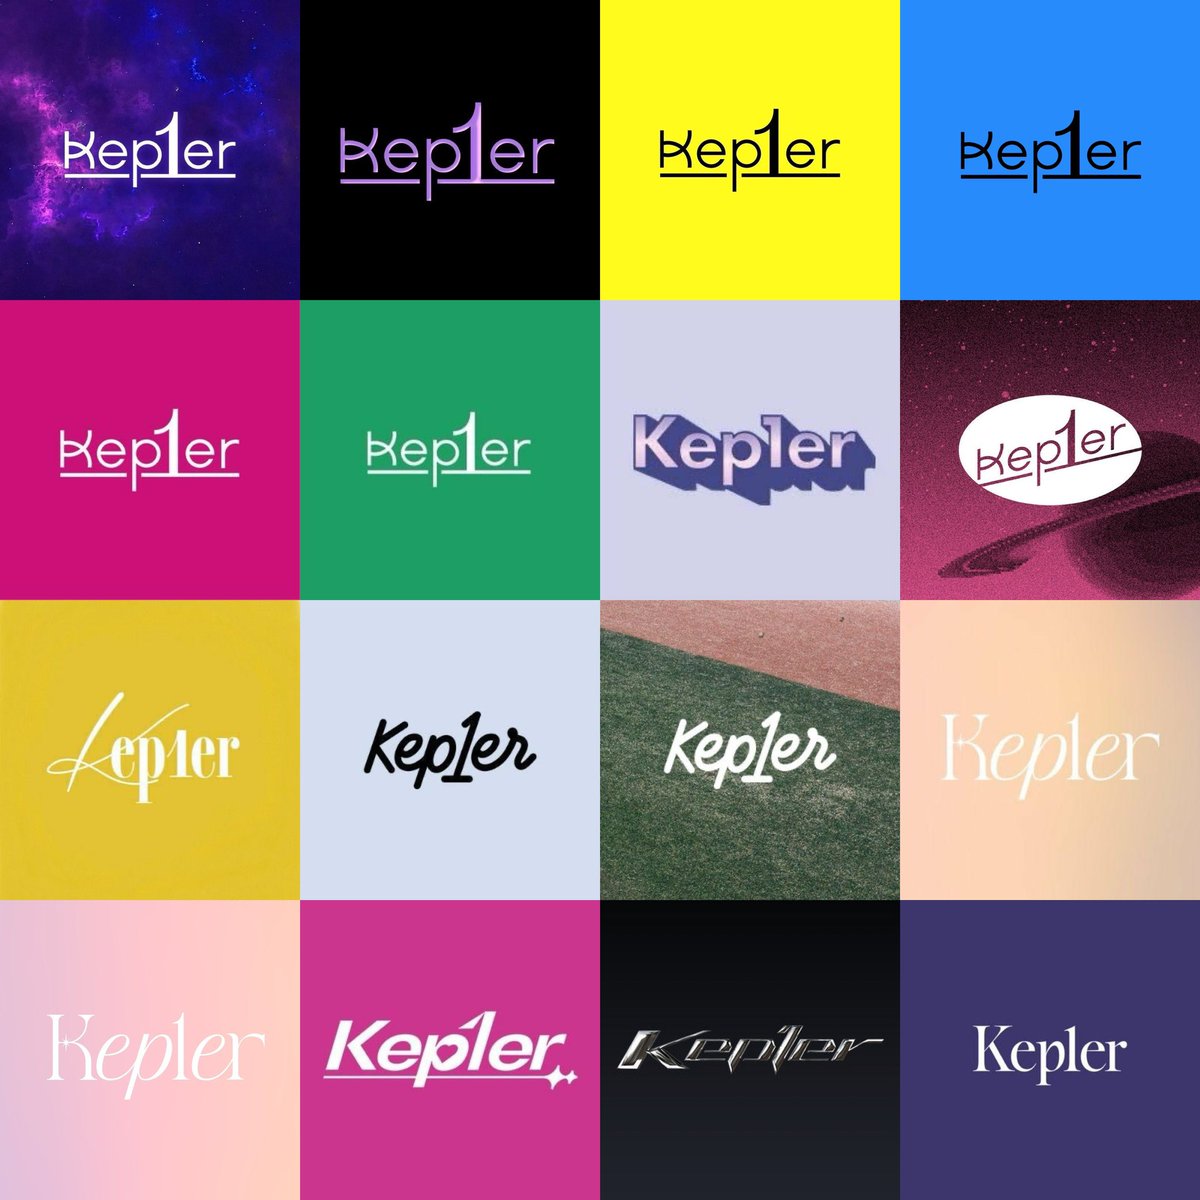 kep1er going back to their roots with the color (i think we still have one more logo after the album & mv drops)